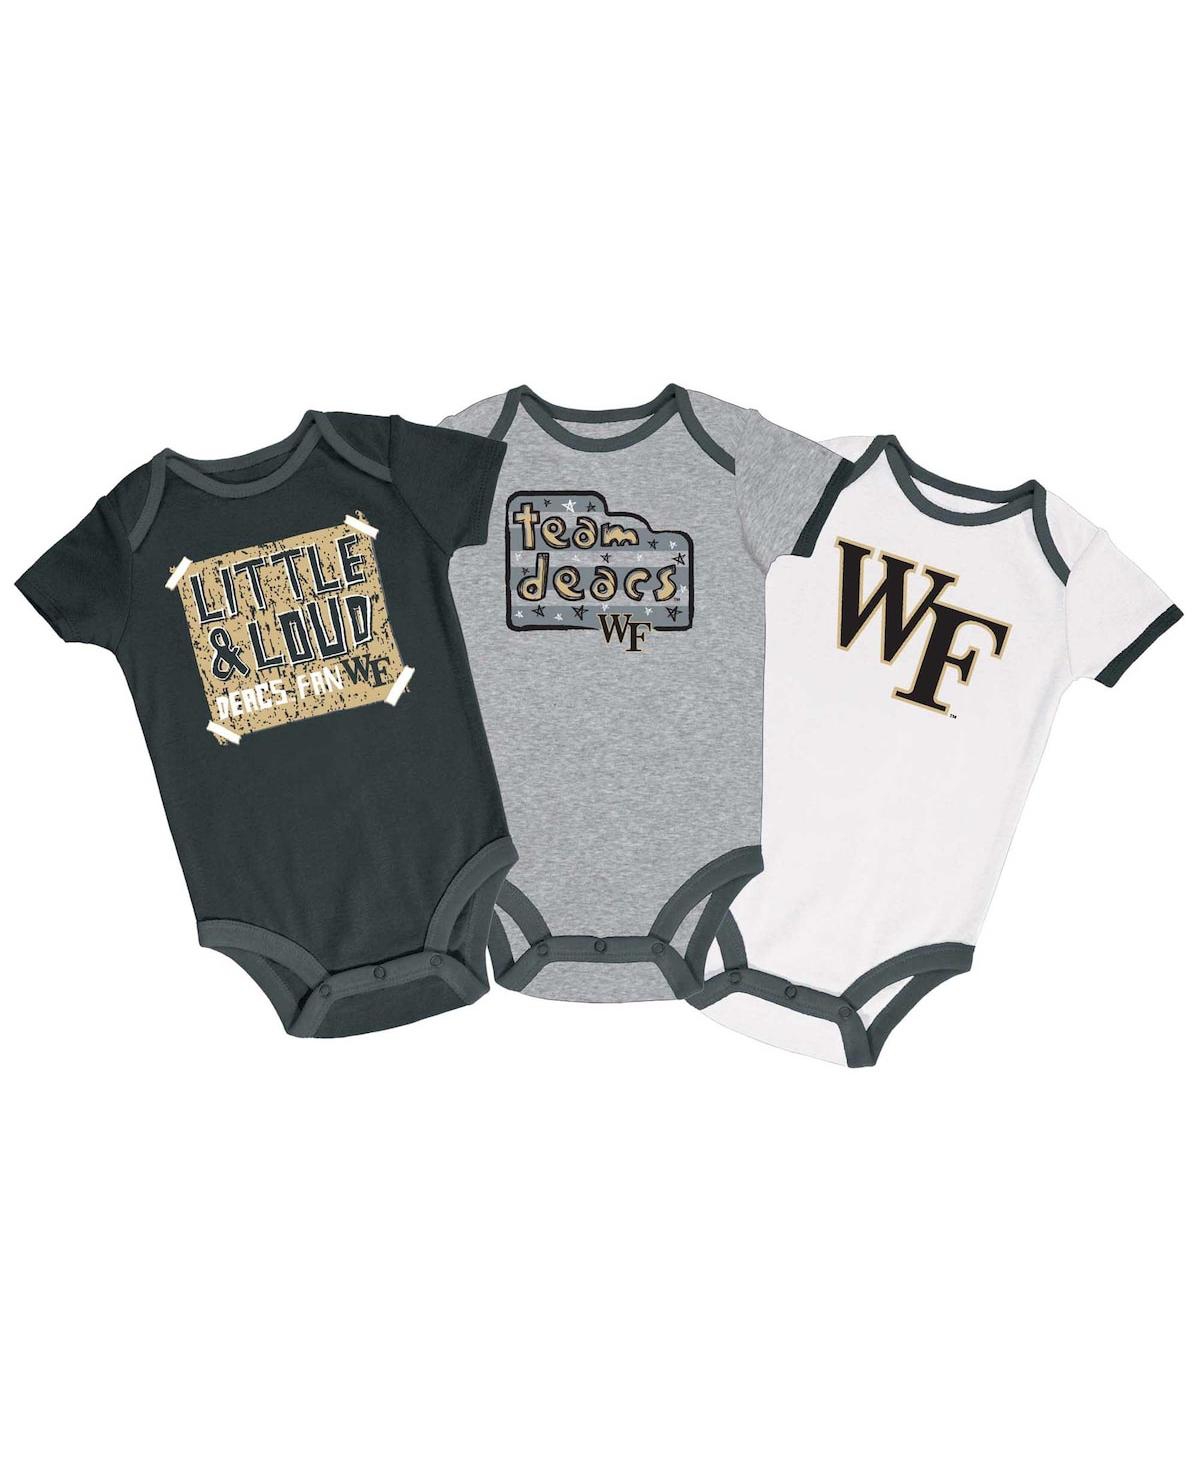 Champion Babies' Infant Boys And Girls  Black, Gray, White Distressed Wake Forest Demon Deacons 3-pack Bodysu In Black,gray,white